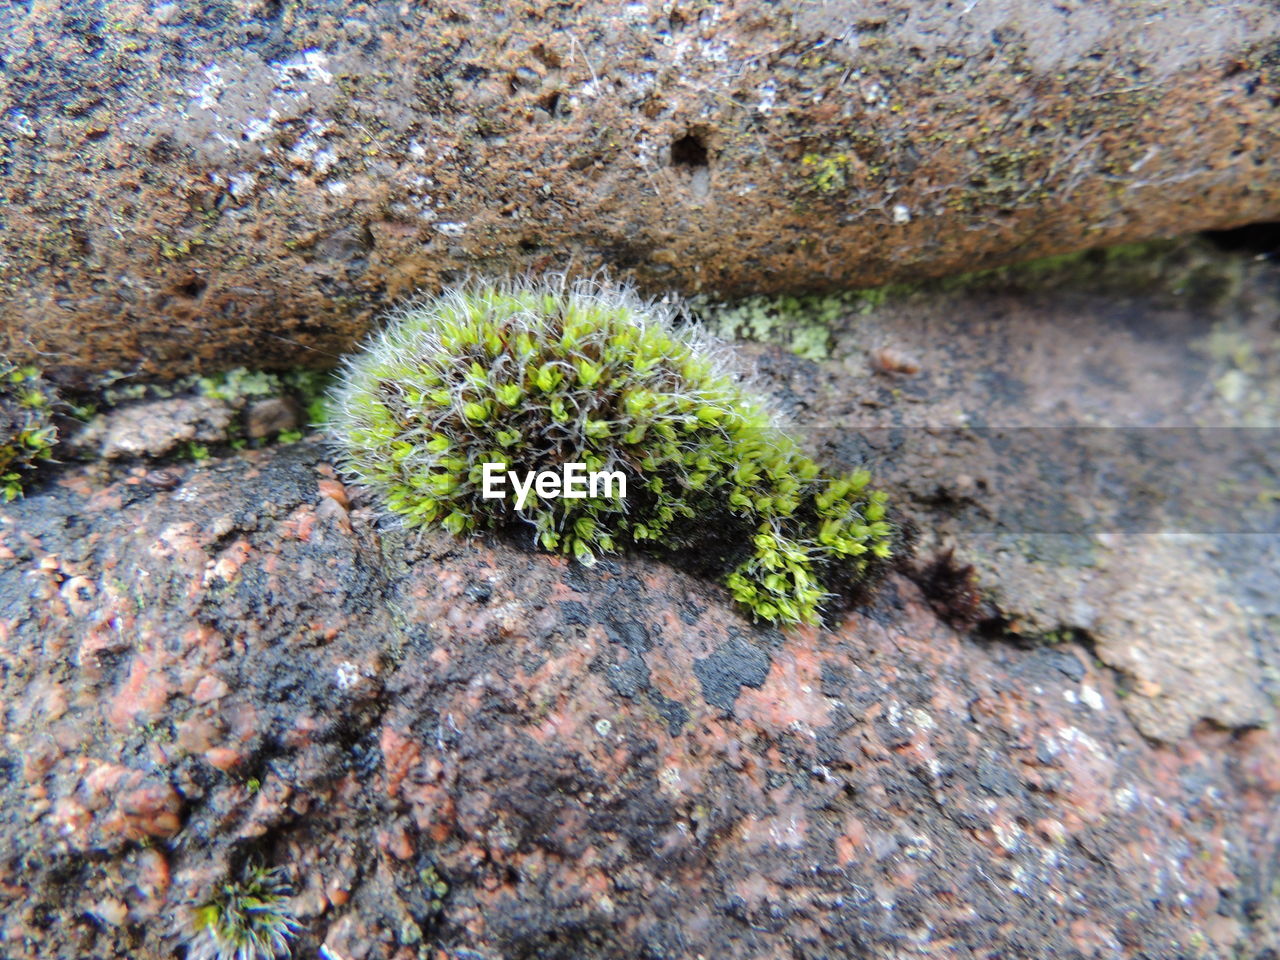 CLOSE-UP OF CACTUS PLANT GROWING ON ROCKS